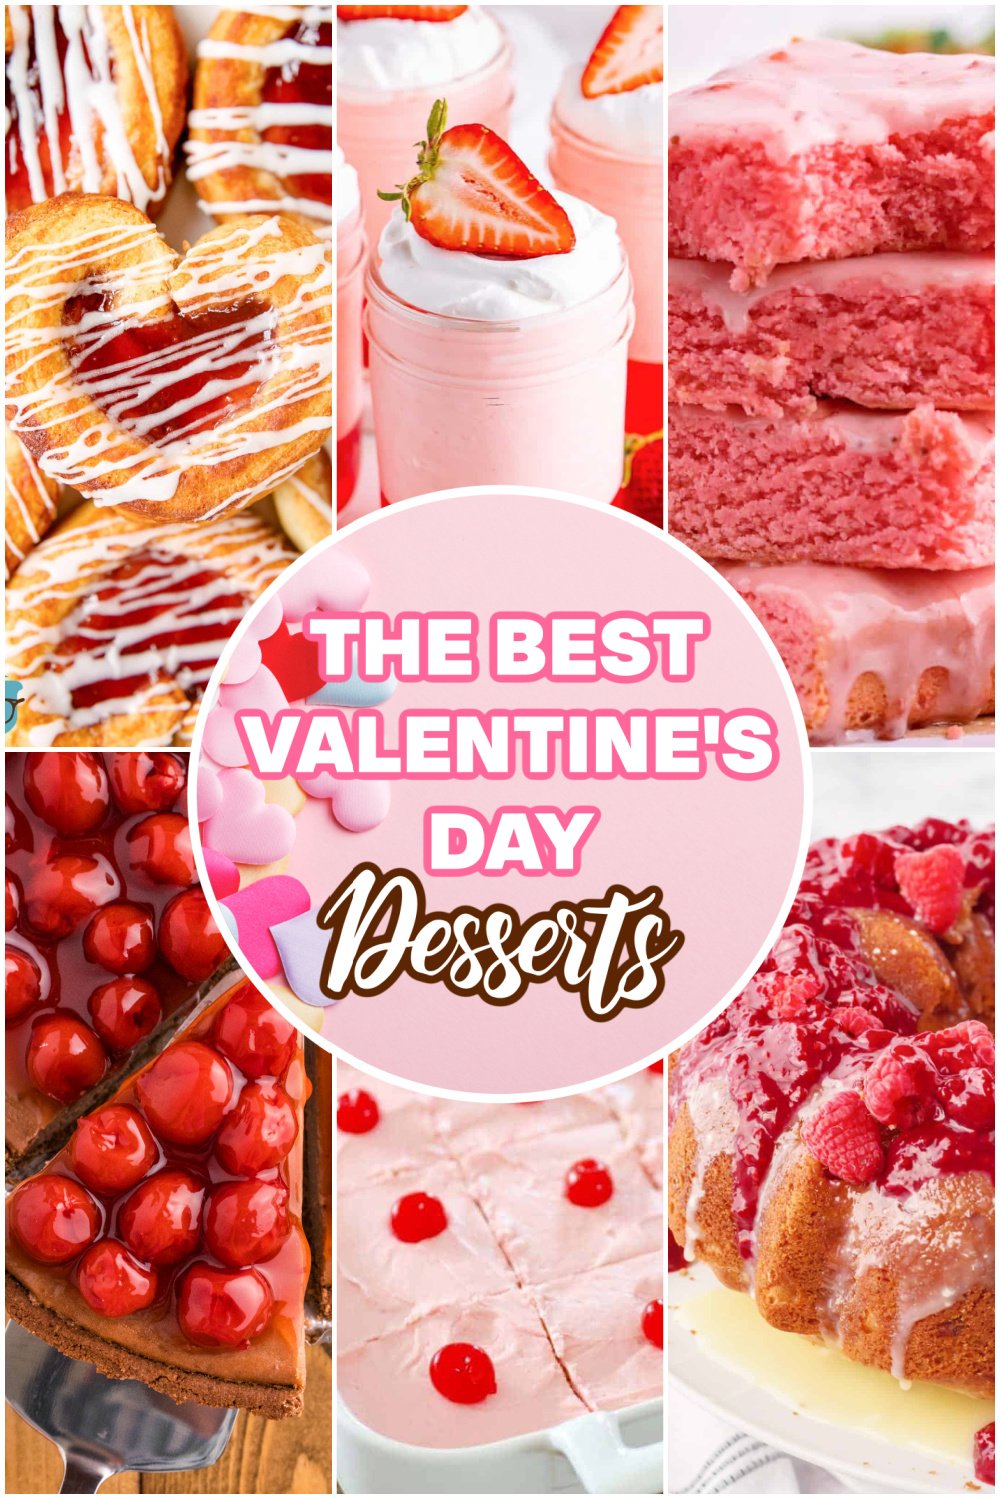 a collage of 6 desserts with text in the middle that says "The Best Valentine's Day Desserts".